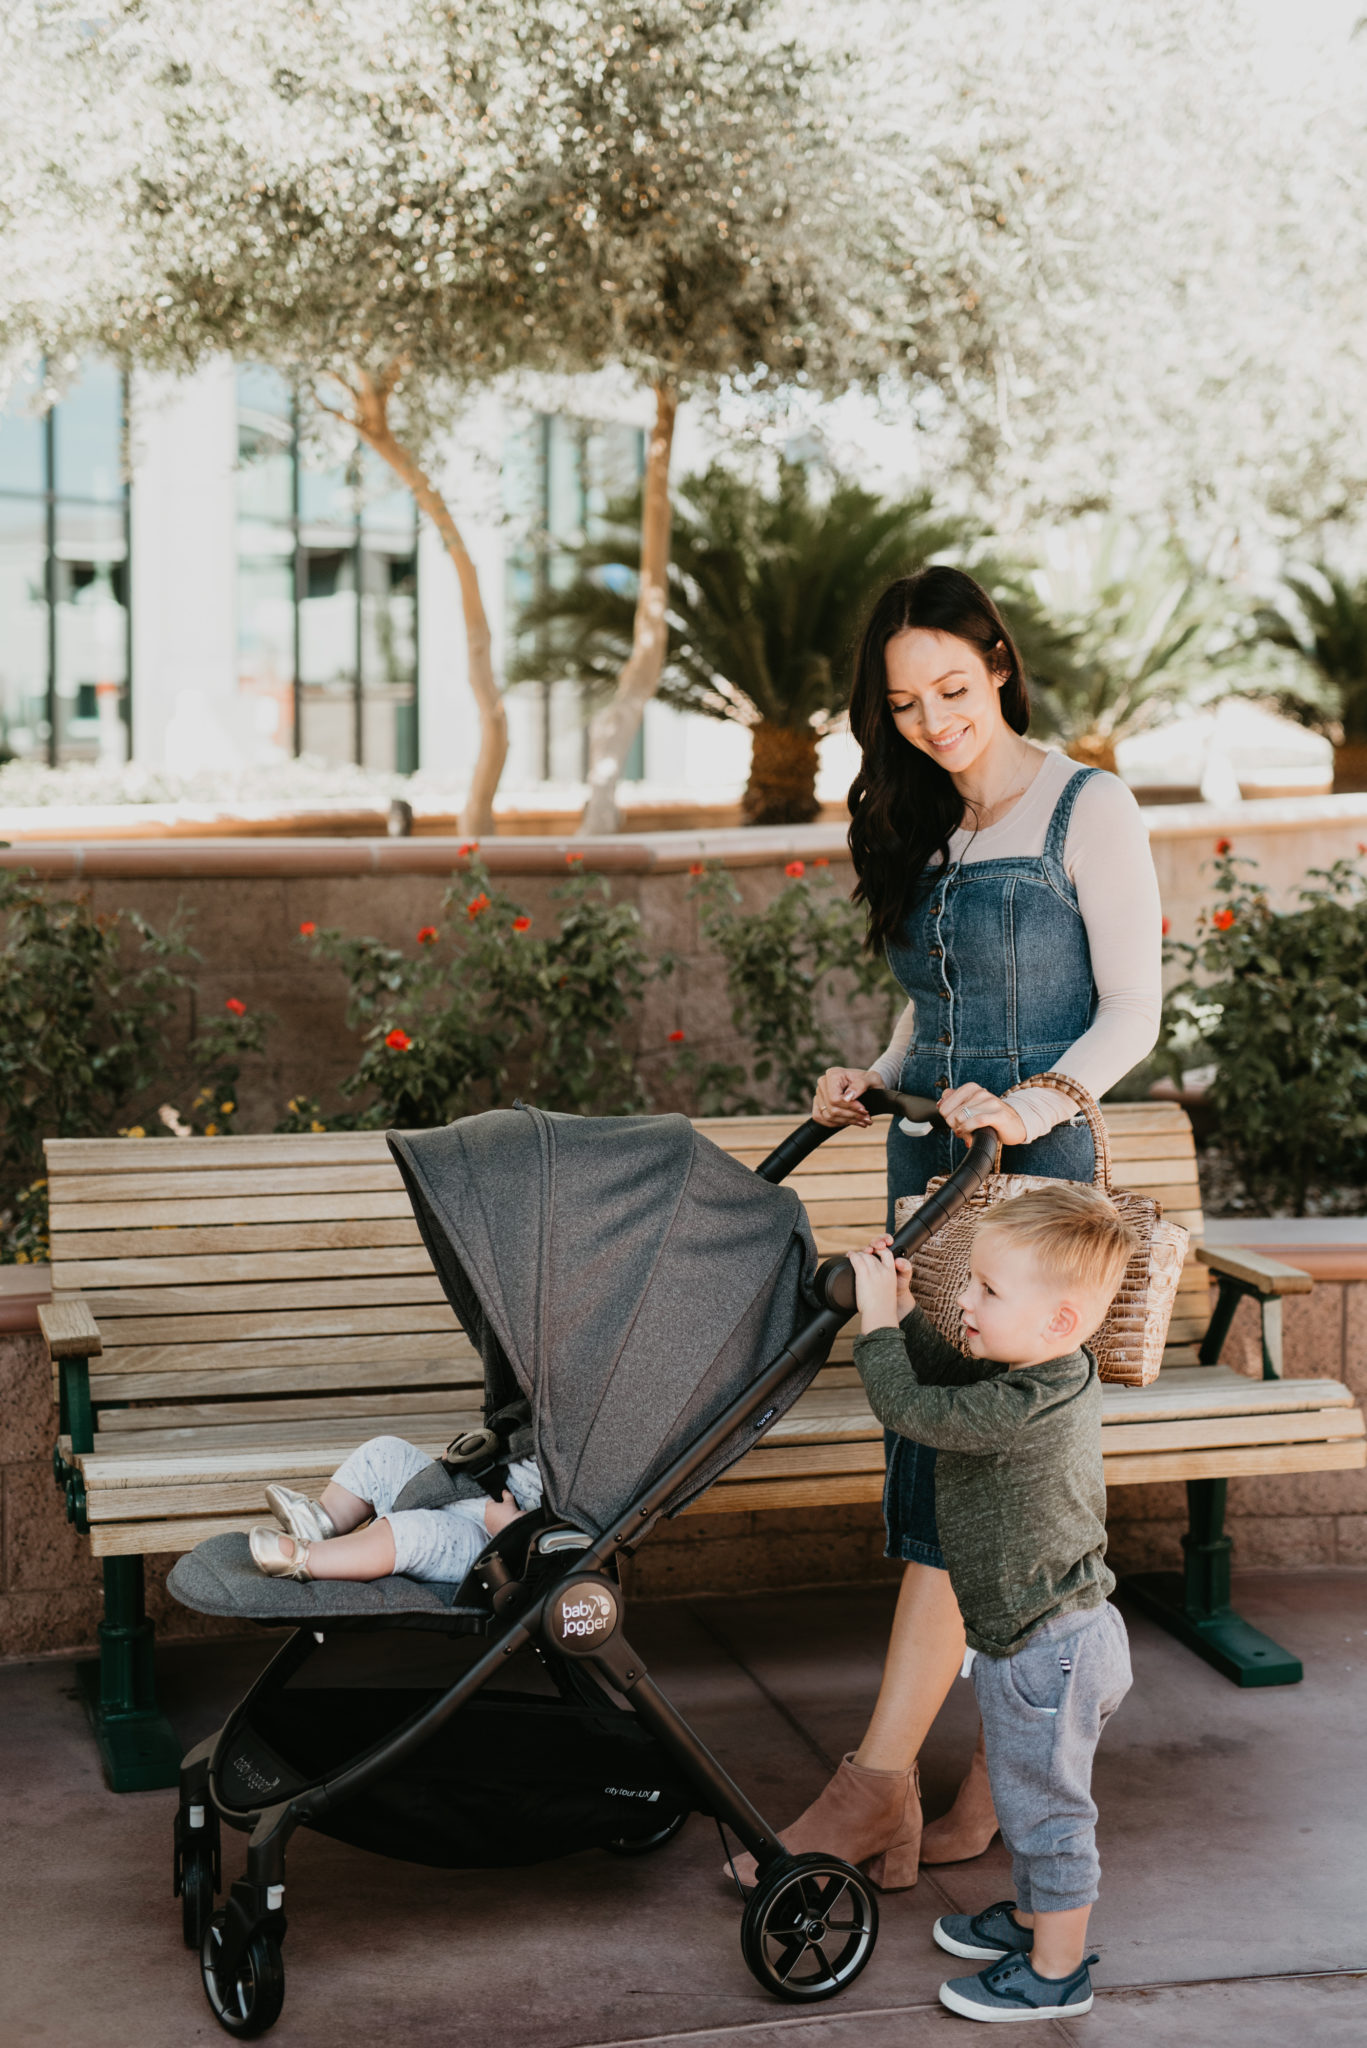 Baby Jogger City Stroller for all your Holiday Travel featured by top Las Vegas life and style blog, Outfits & Outings: City Tour Lux review